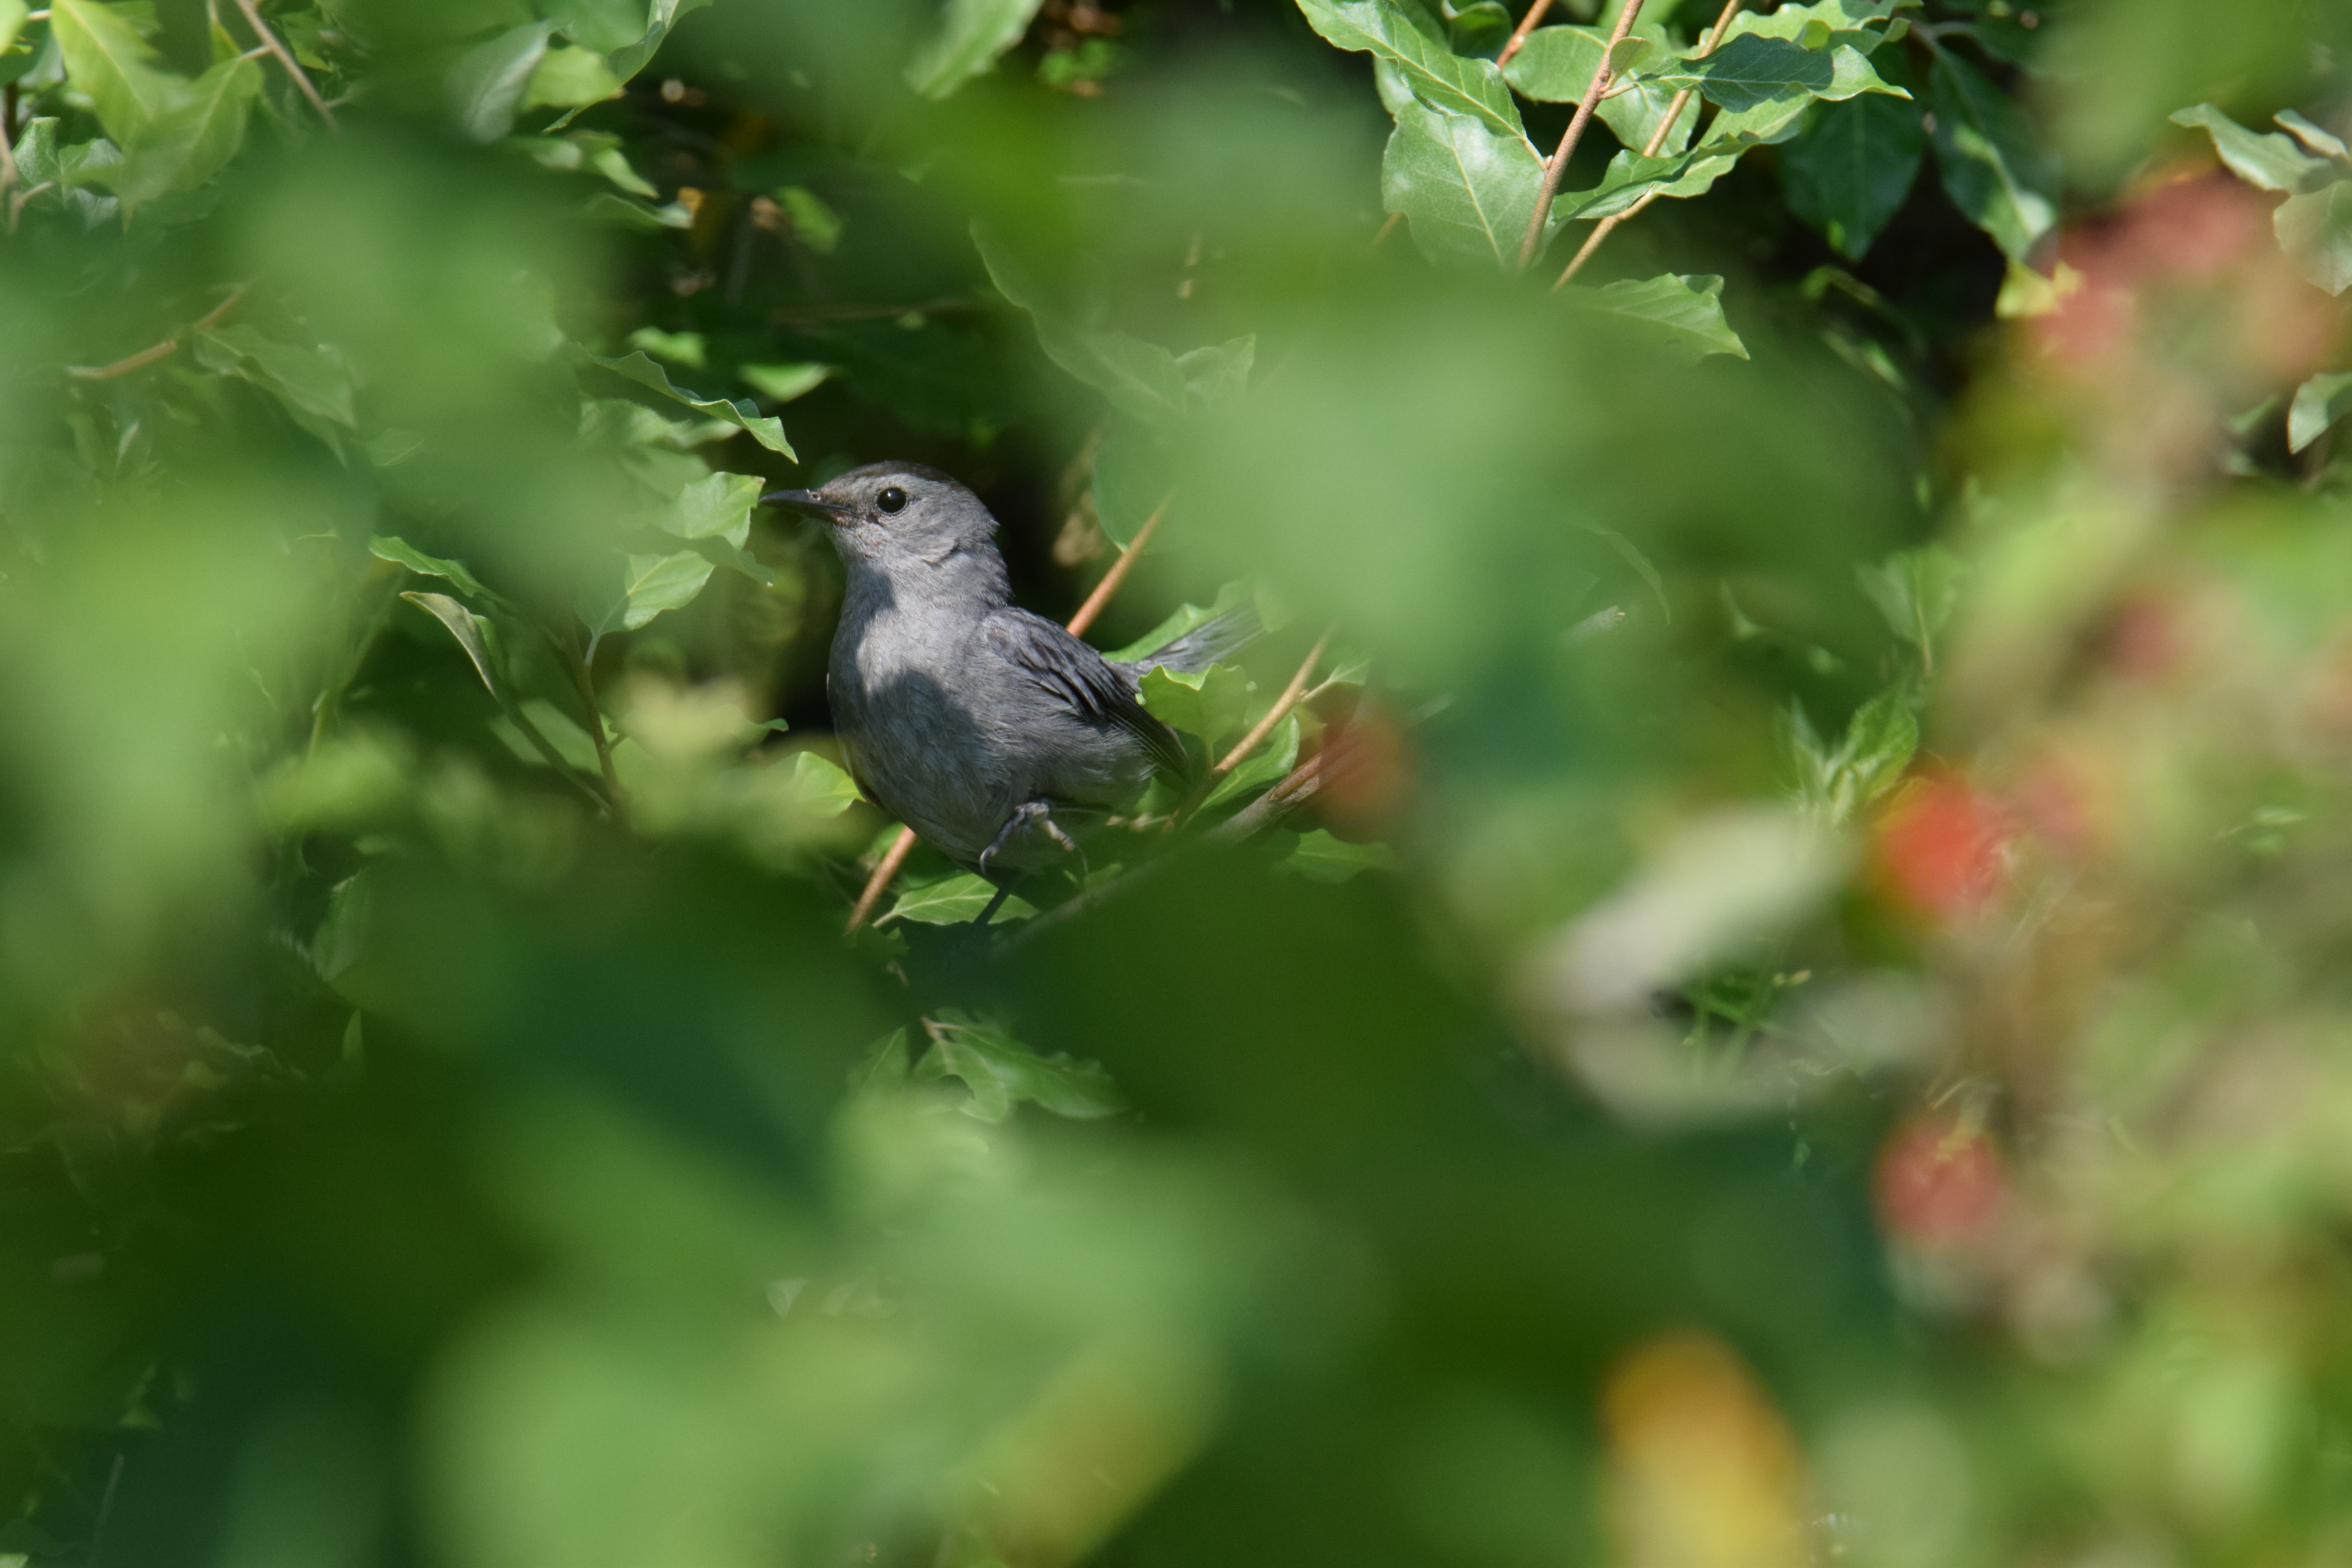 a grey catbird in a small gap among out of focus leaves